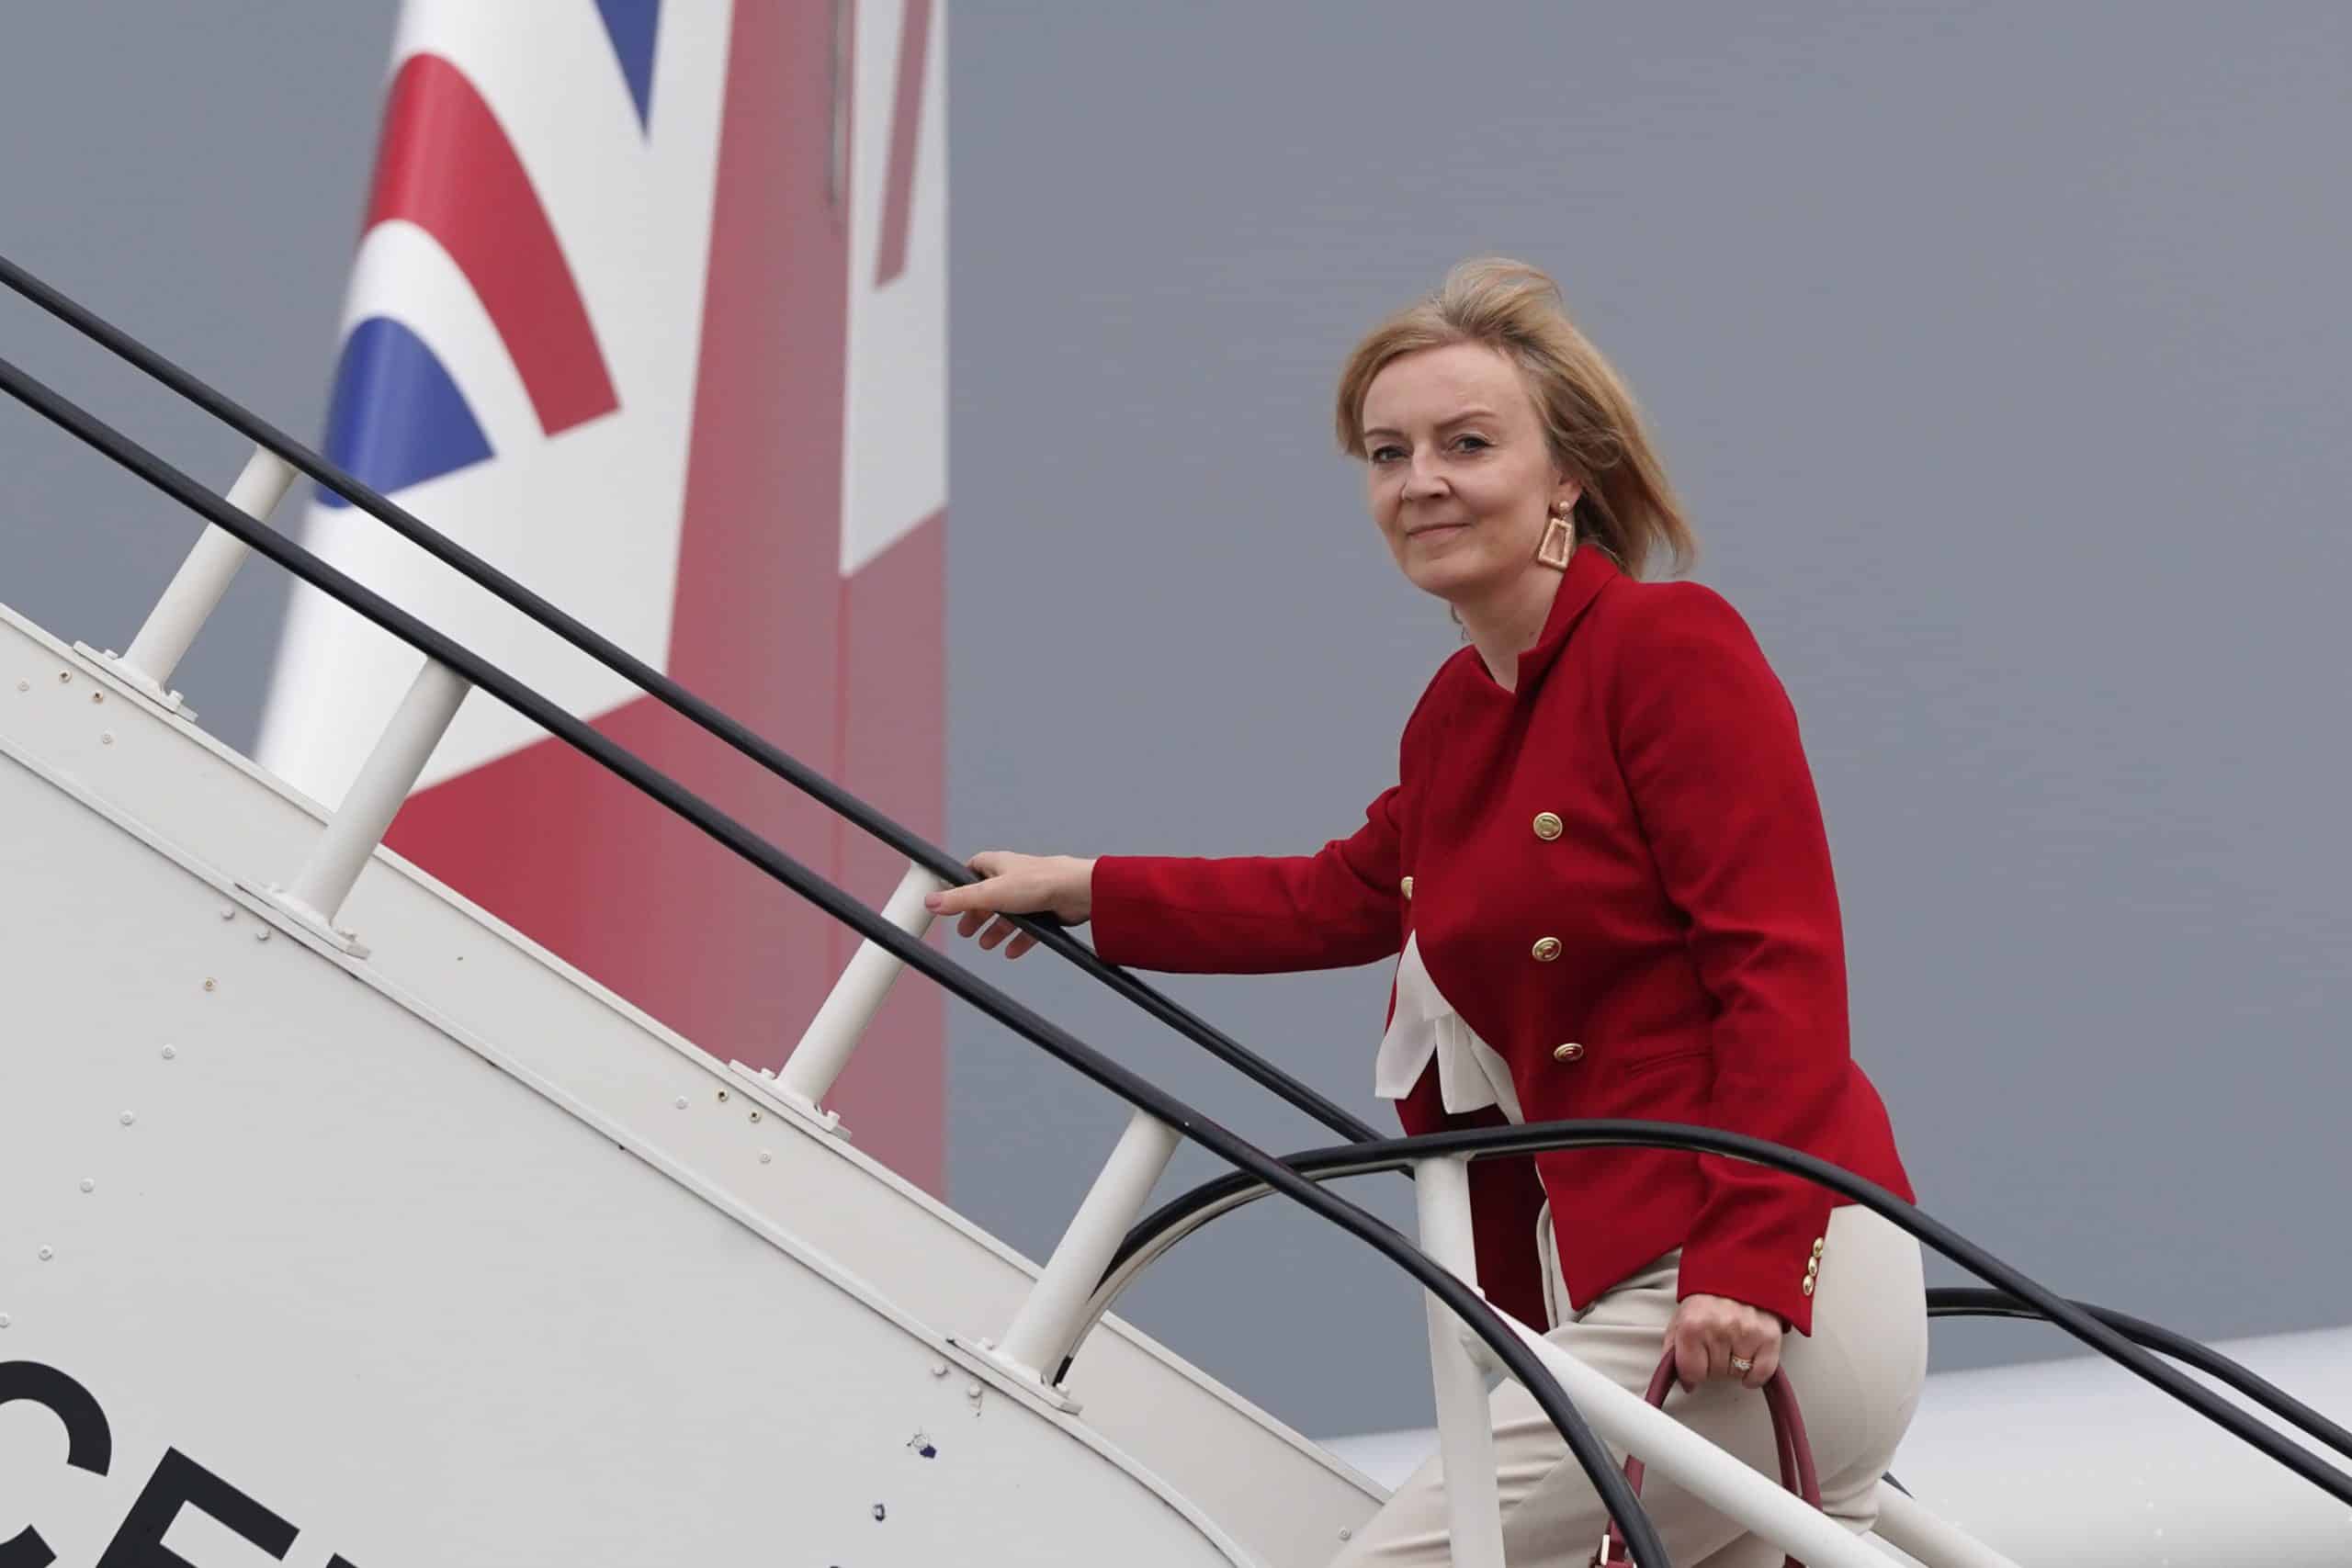 Liz Truss sparked Putin’s nuclear threat & people are astounded